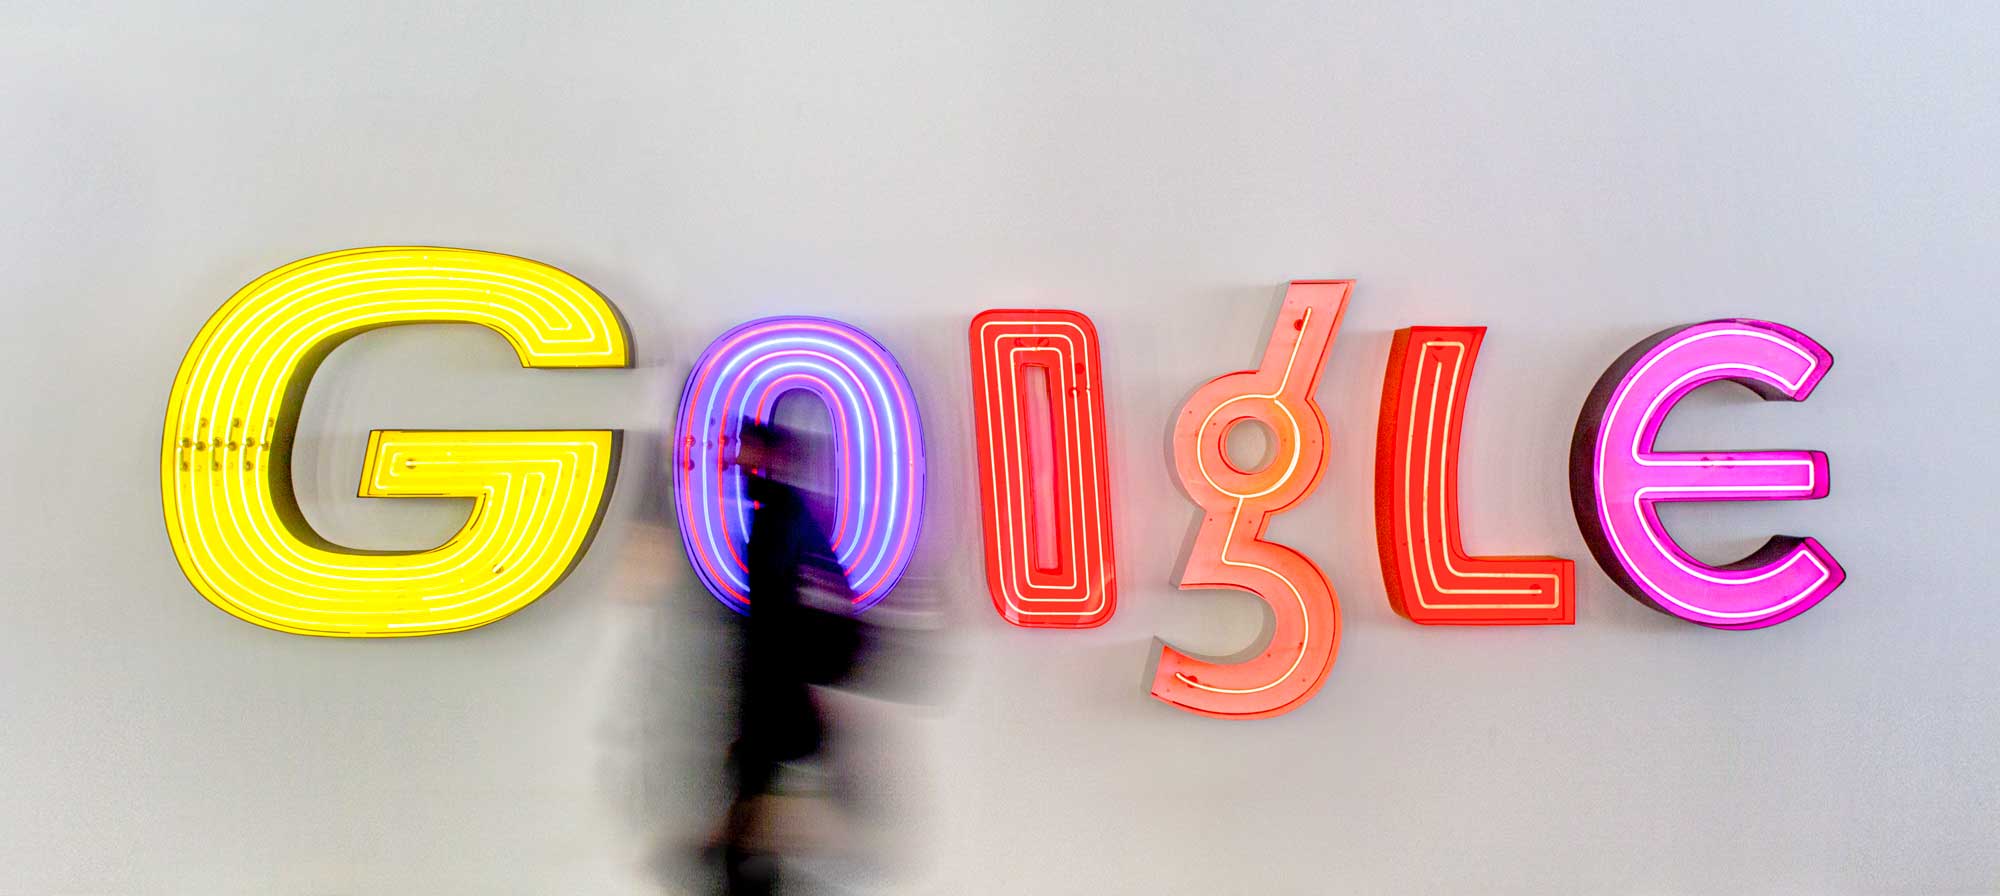 Google Neon for the Google Doodle project